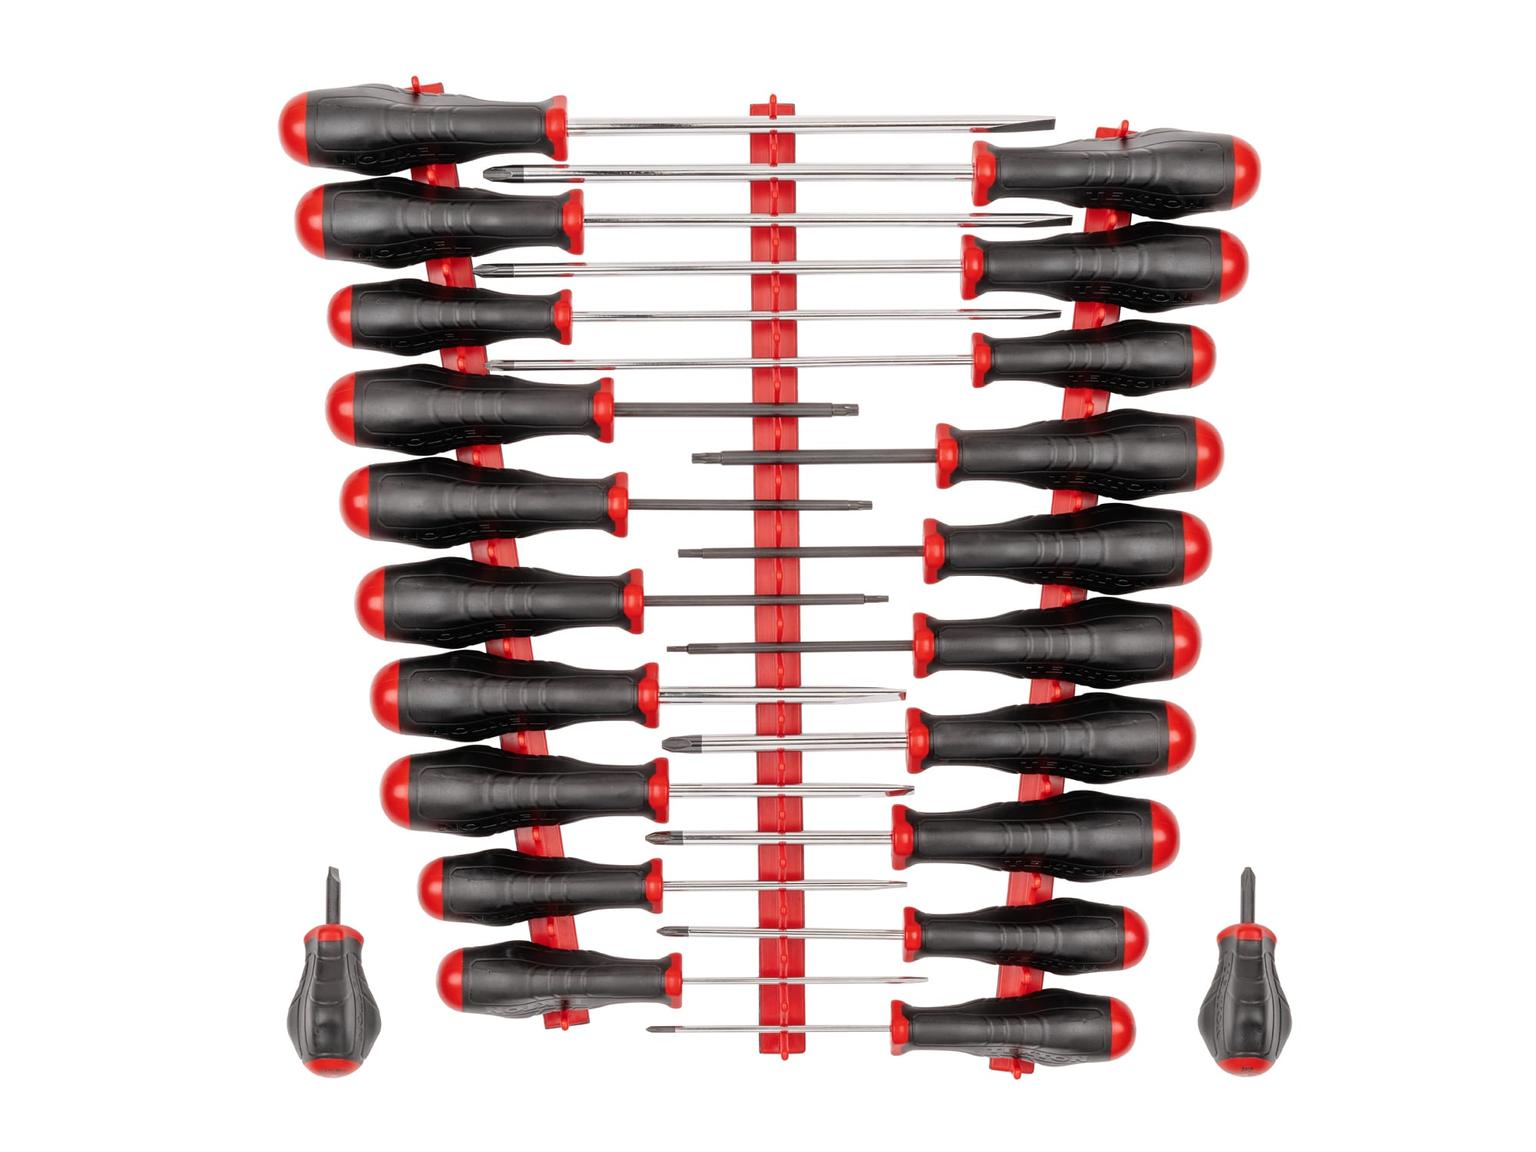 TEKTON DRV45501-T High-Torque Screwdriver Set with Red Rails, 22-Piece (#0-#3, 1/8-5/16 in., T10-30)